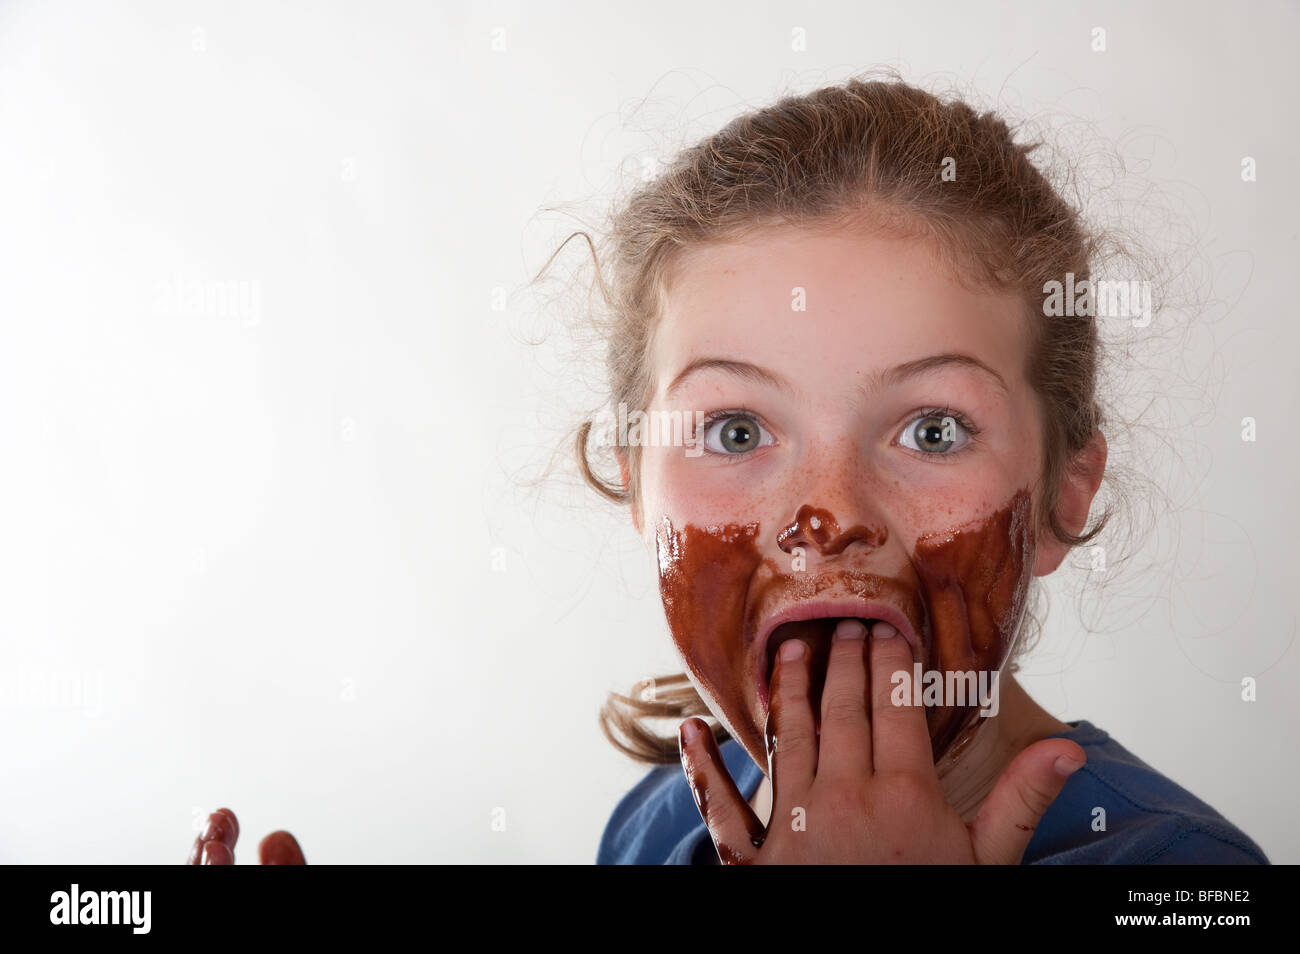 surprised little girl with chocolate covered face Stock Photo